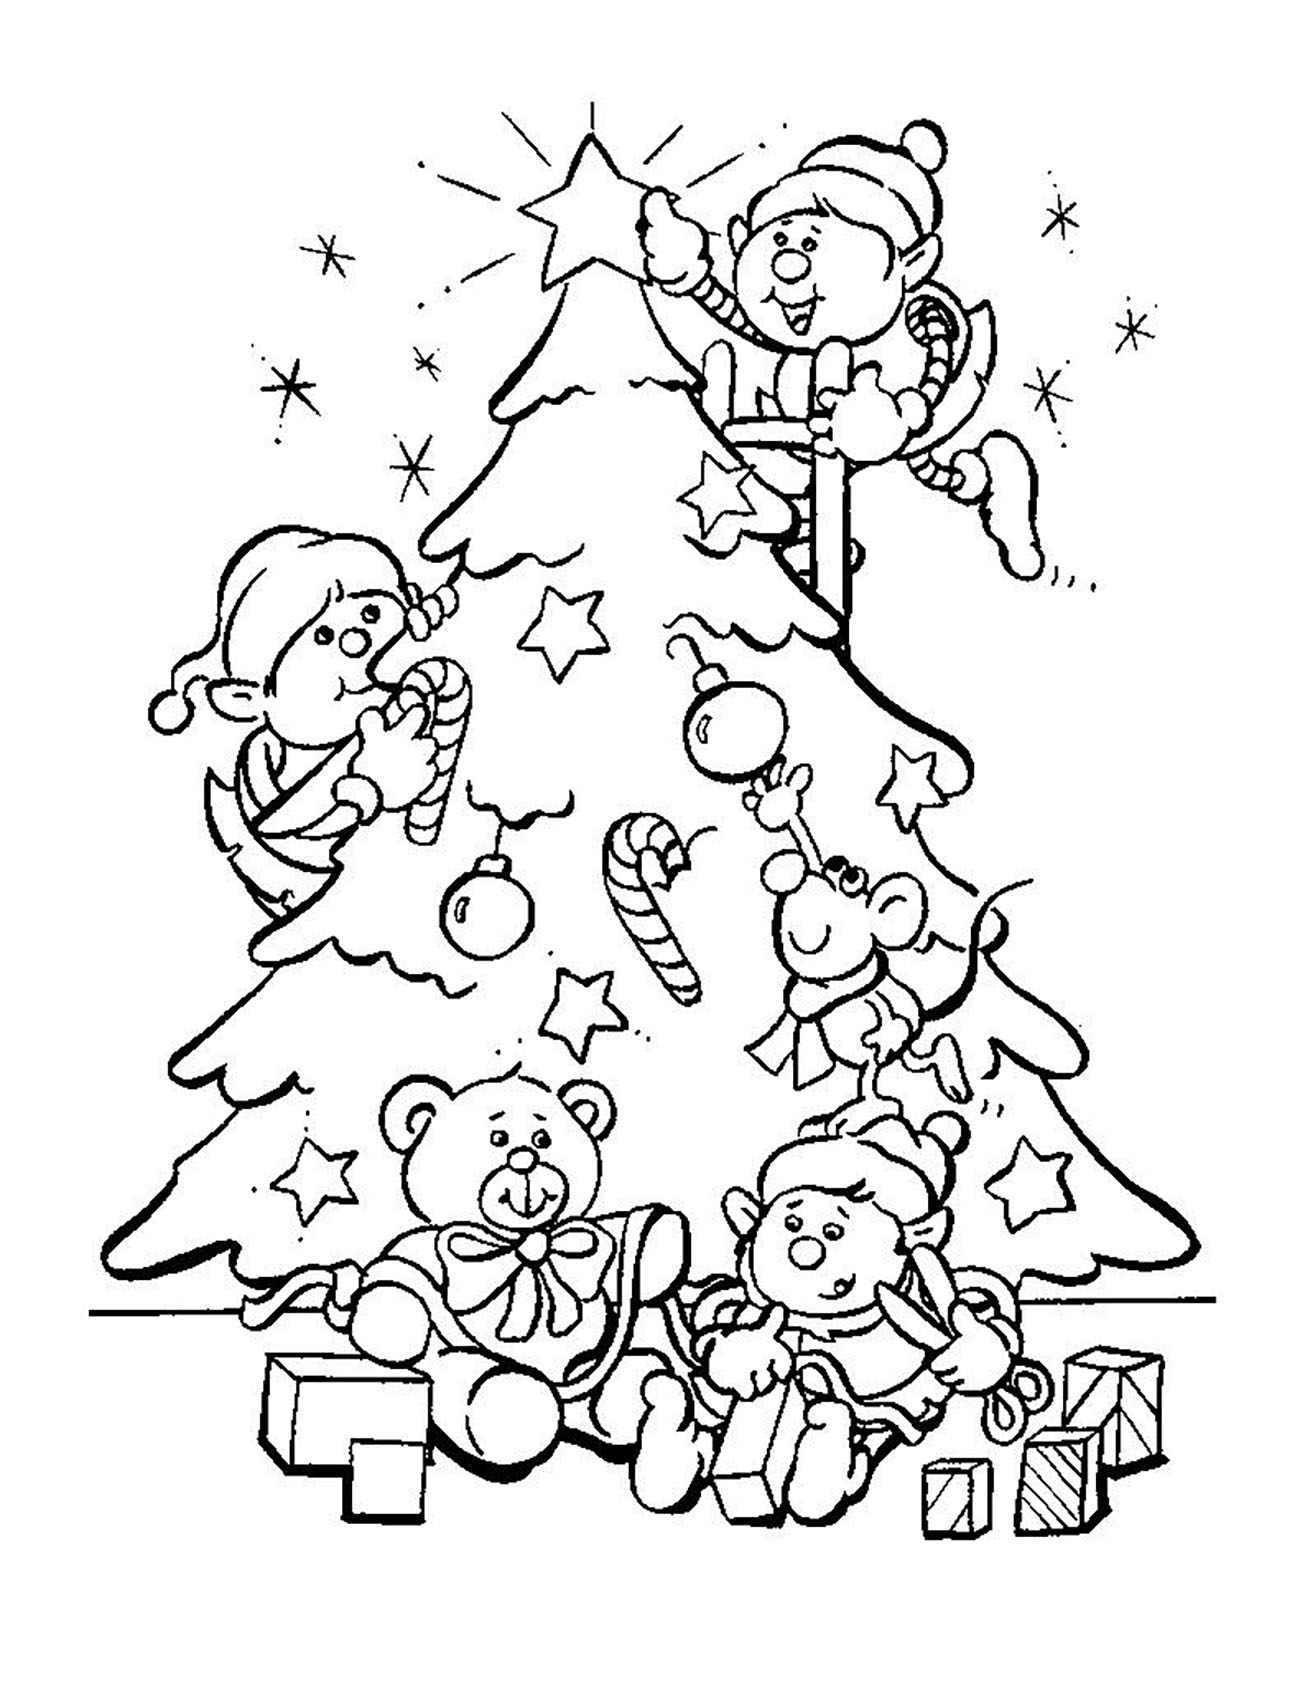 65 Top Coloring Pages Of Christmas Trees To Print Download Free Images